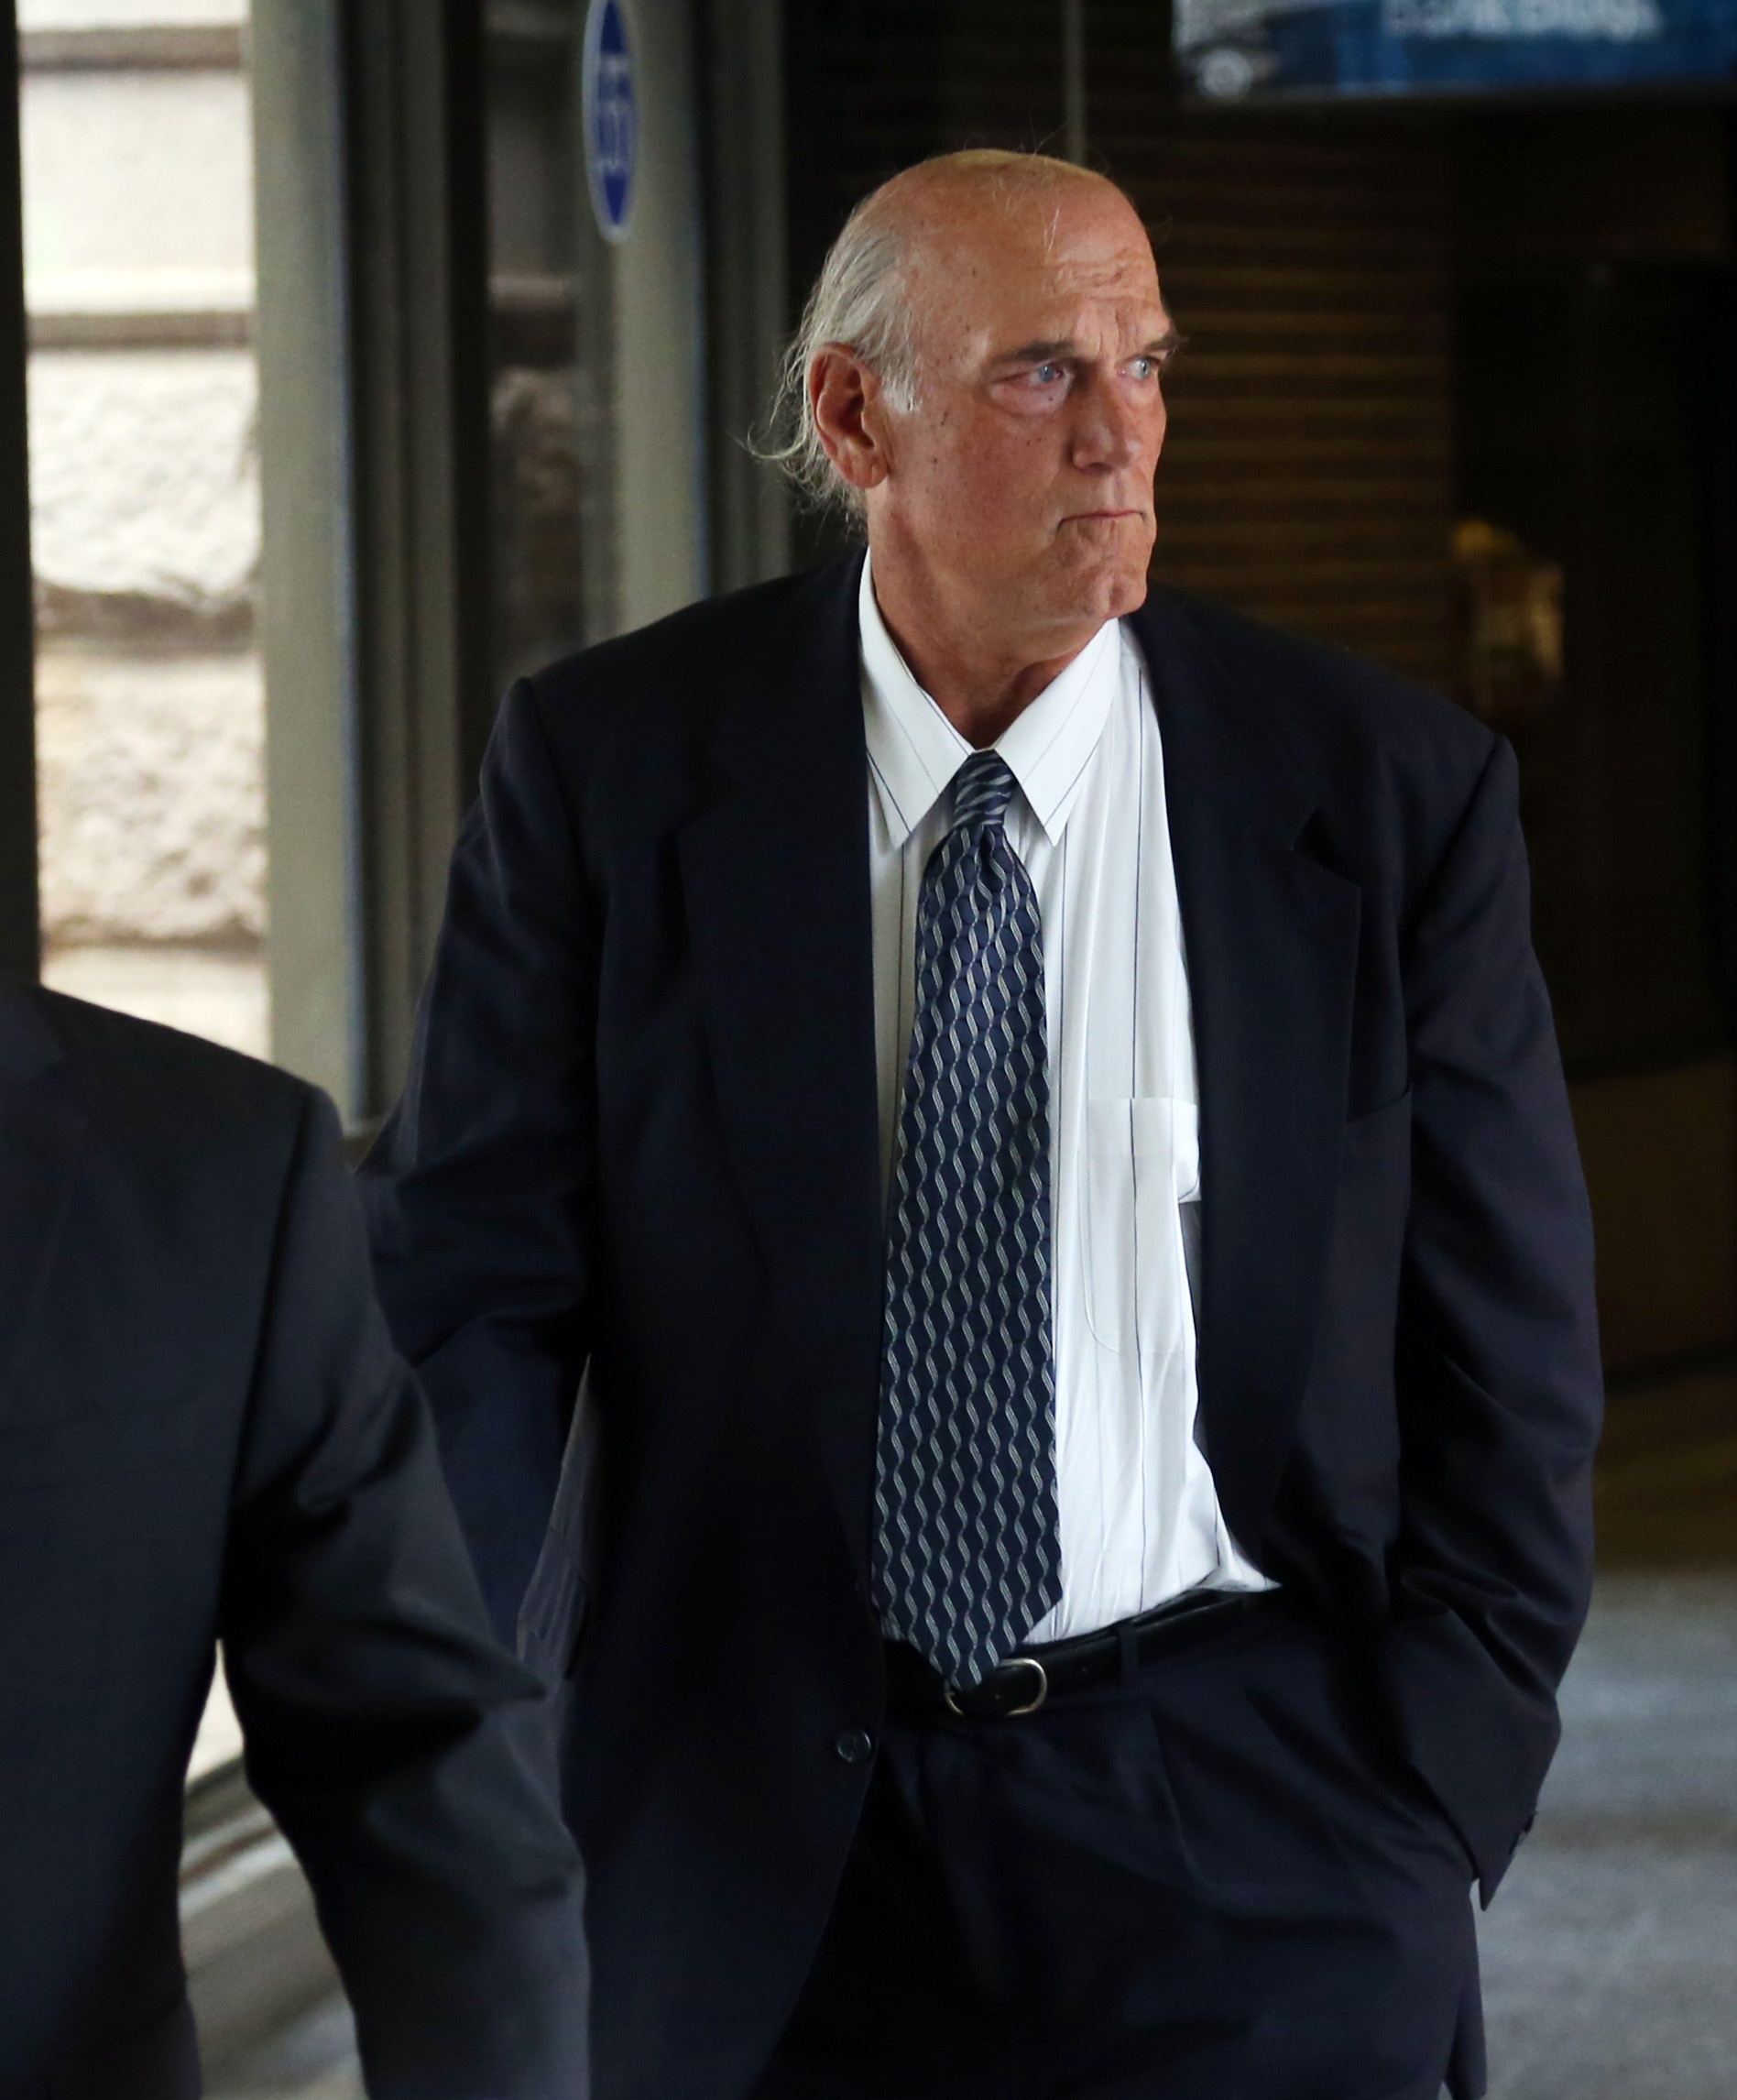 Former Minnesota Gov. Jesse Ventura makes his way back into Warren E. Burger Federal Building during the first day of jury selection in a defamation lawsuit, on July 8, 2014 in St. Paul, Minn. (Jim Mone—AP)